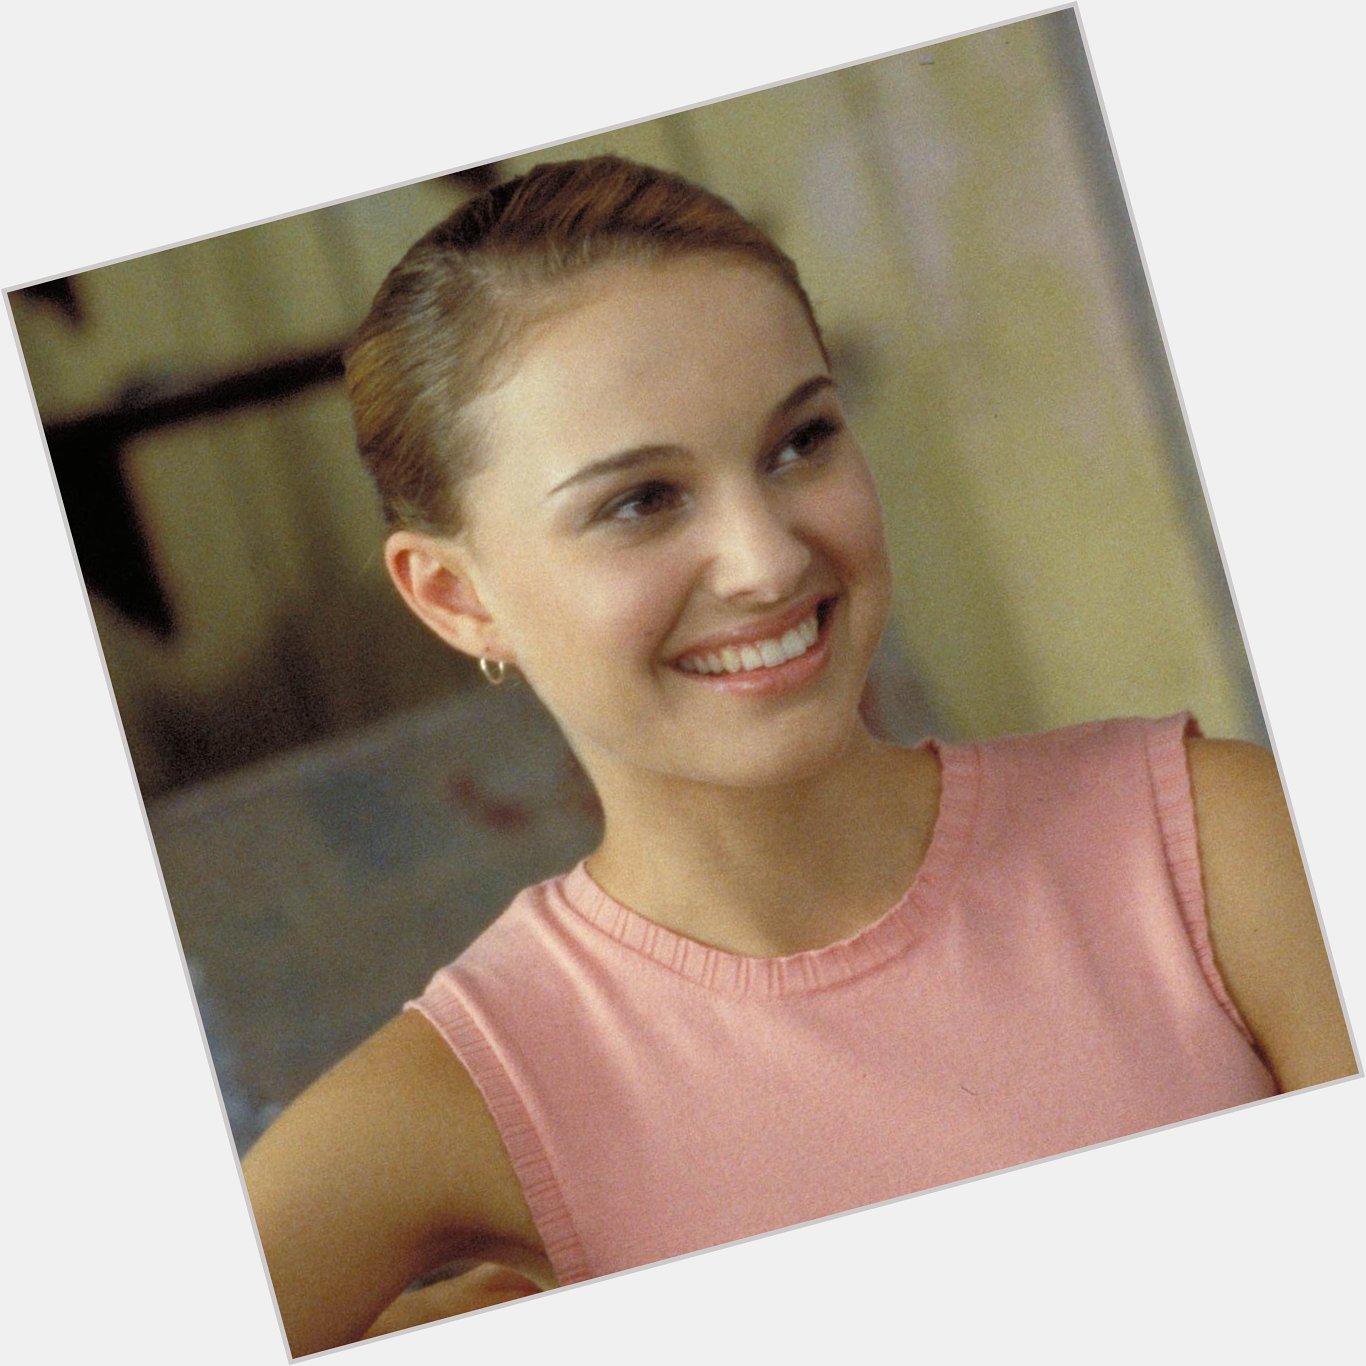 Celebrating the talented Natalie Portman today. to send her happy birthday wishes! 